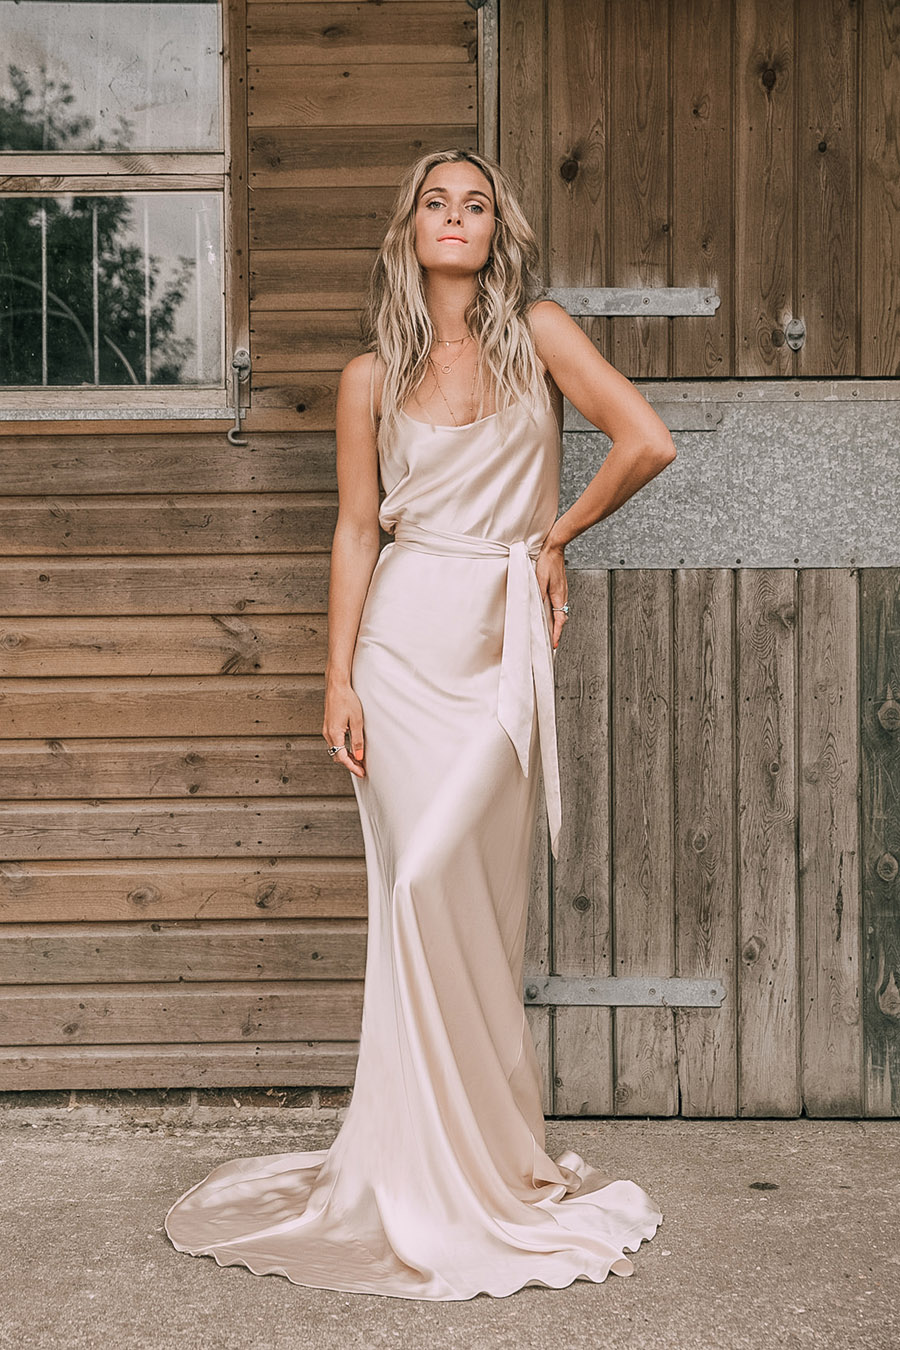 Belle and Bunty cowgirl wedding dress collection 2019 London (8)